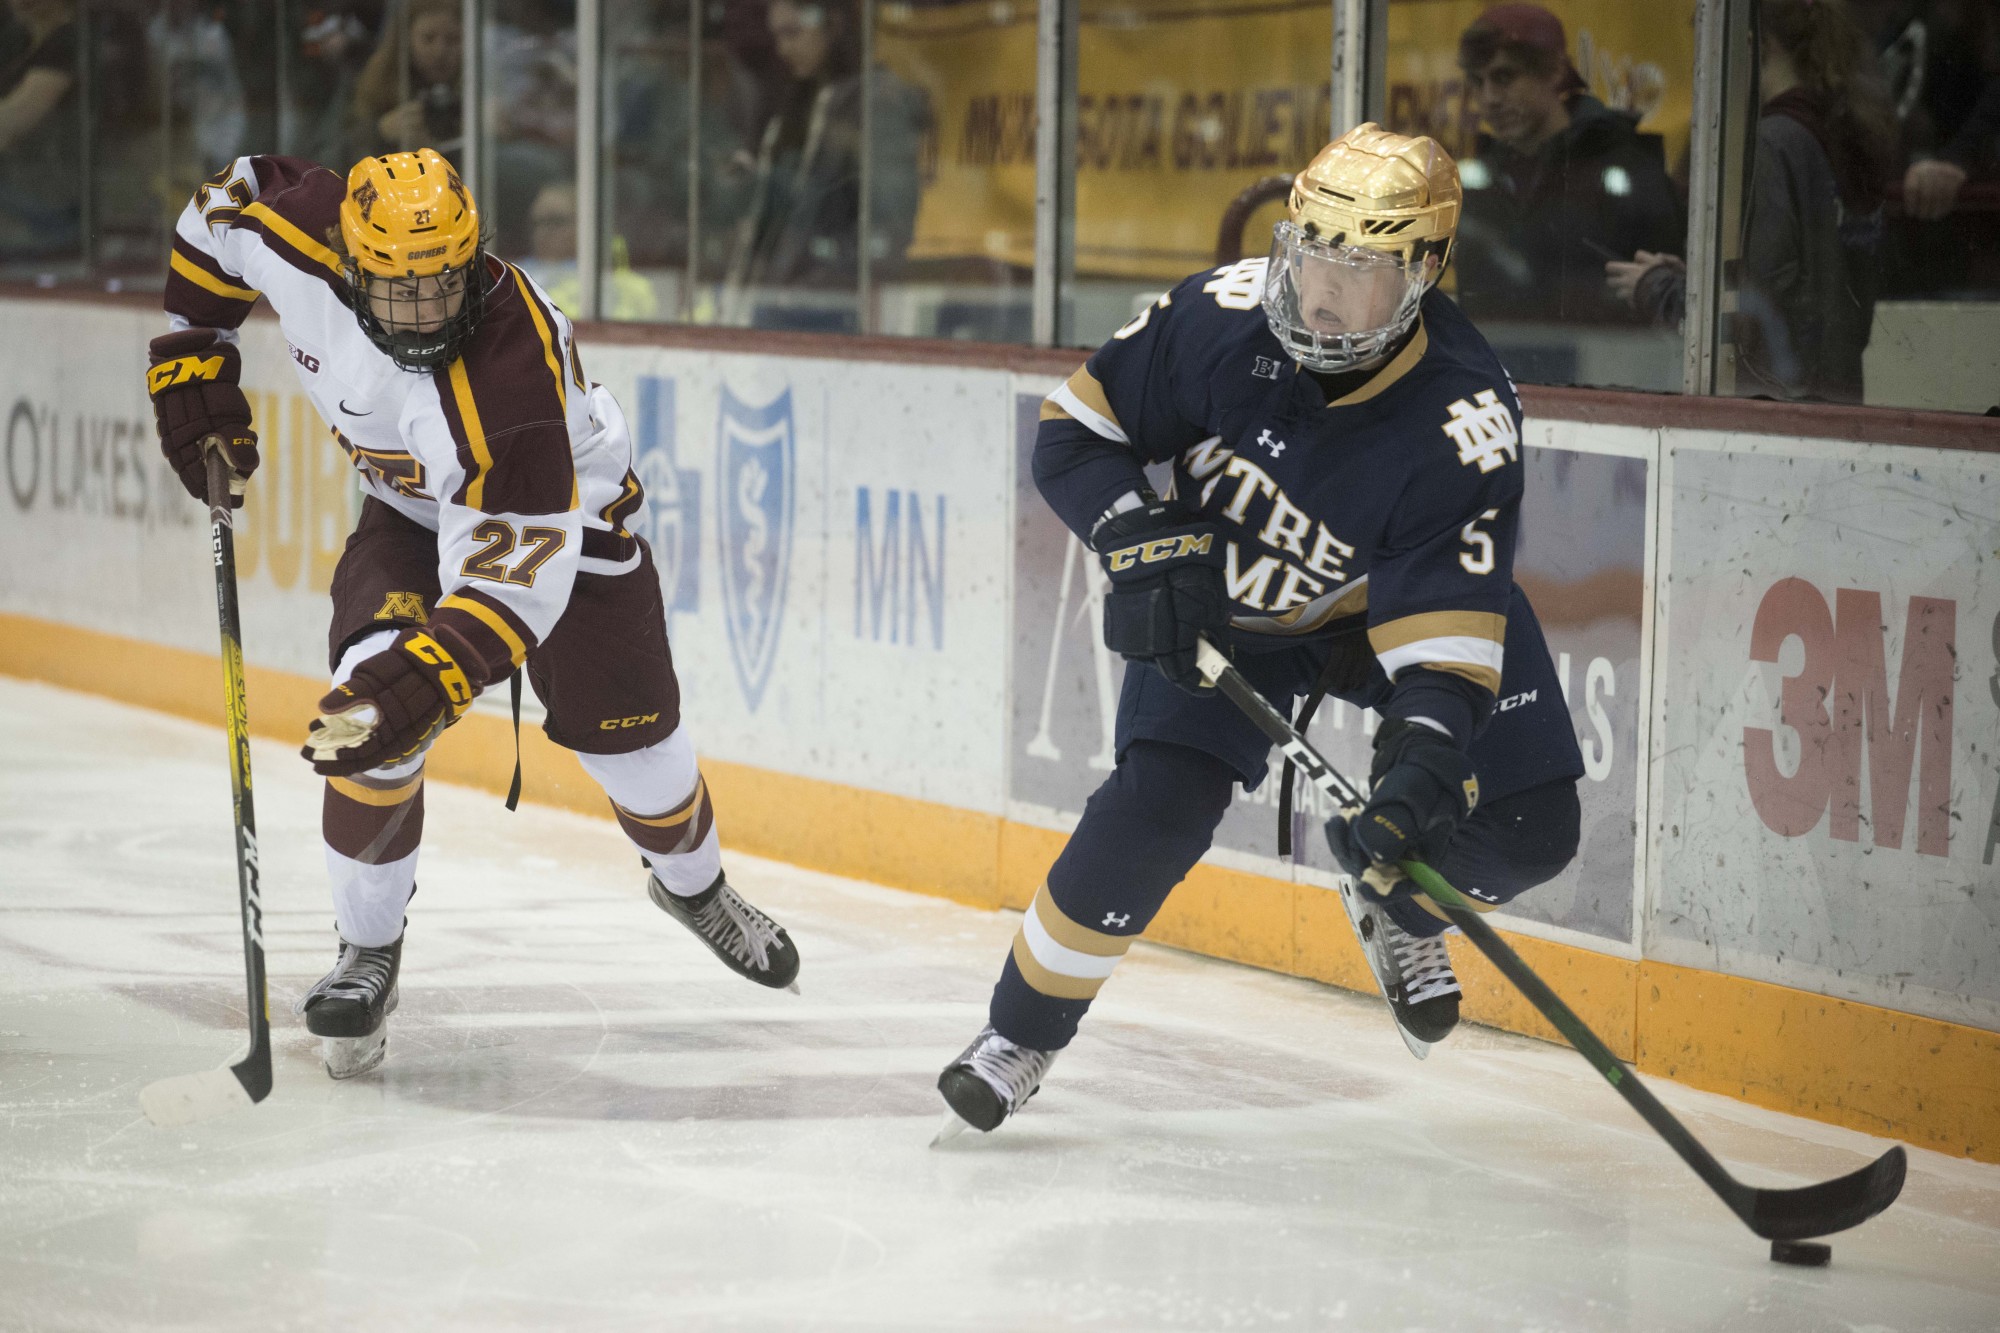 Forward Blake Mclaughlin skates towards the puck during the game against the Notre Dame Fighting Irish at 3M Arena at Mariucci on Friday, Nov. 1. The Gophers won 3-2 in double overtime. 